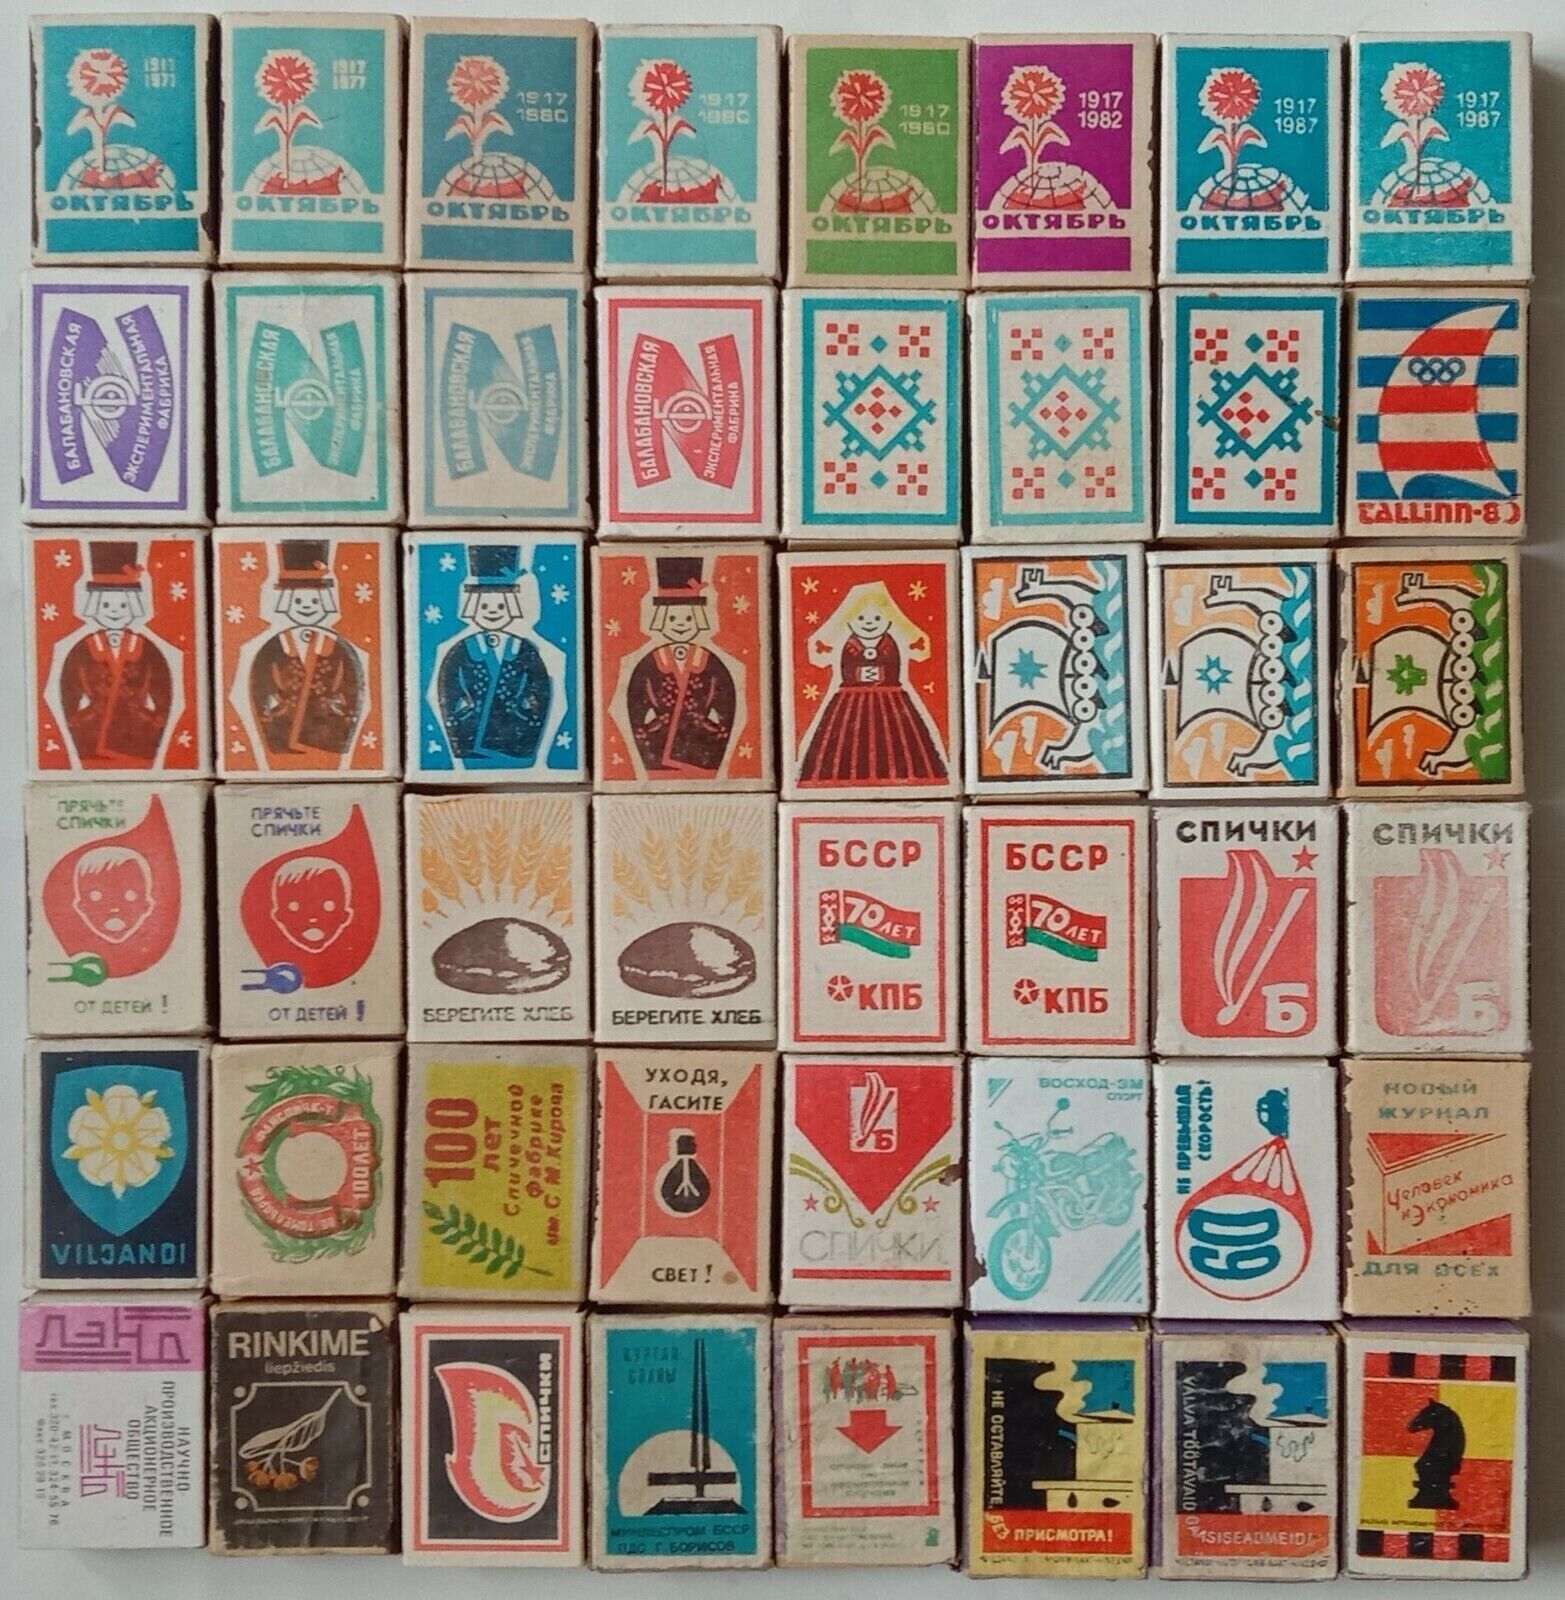 Old Collection of Soviet Matchboxes Without Matches Inside 1950-1980s - 48 pcs.